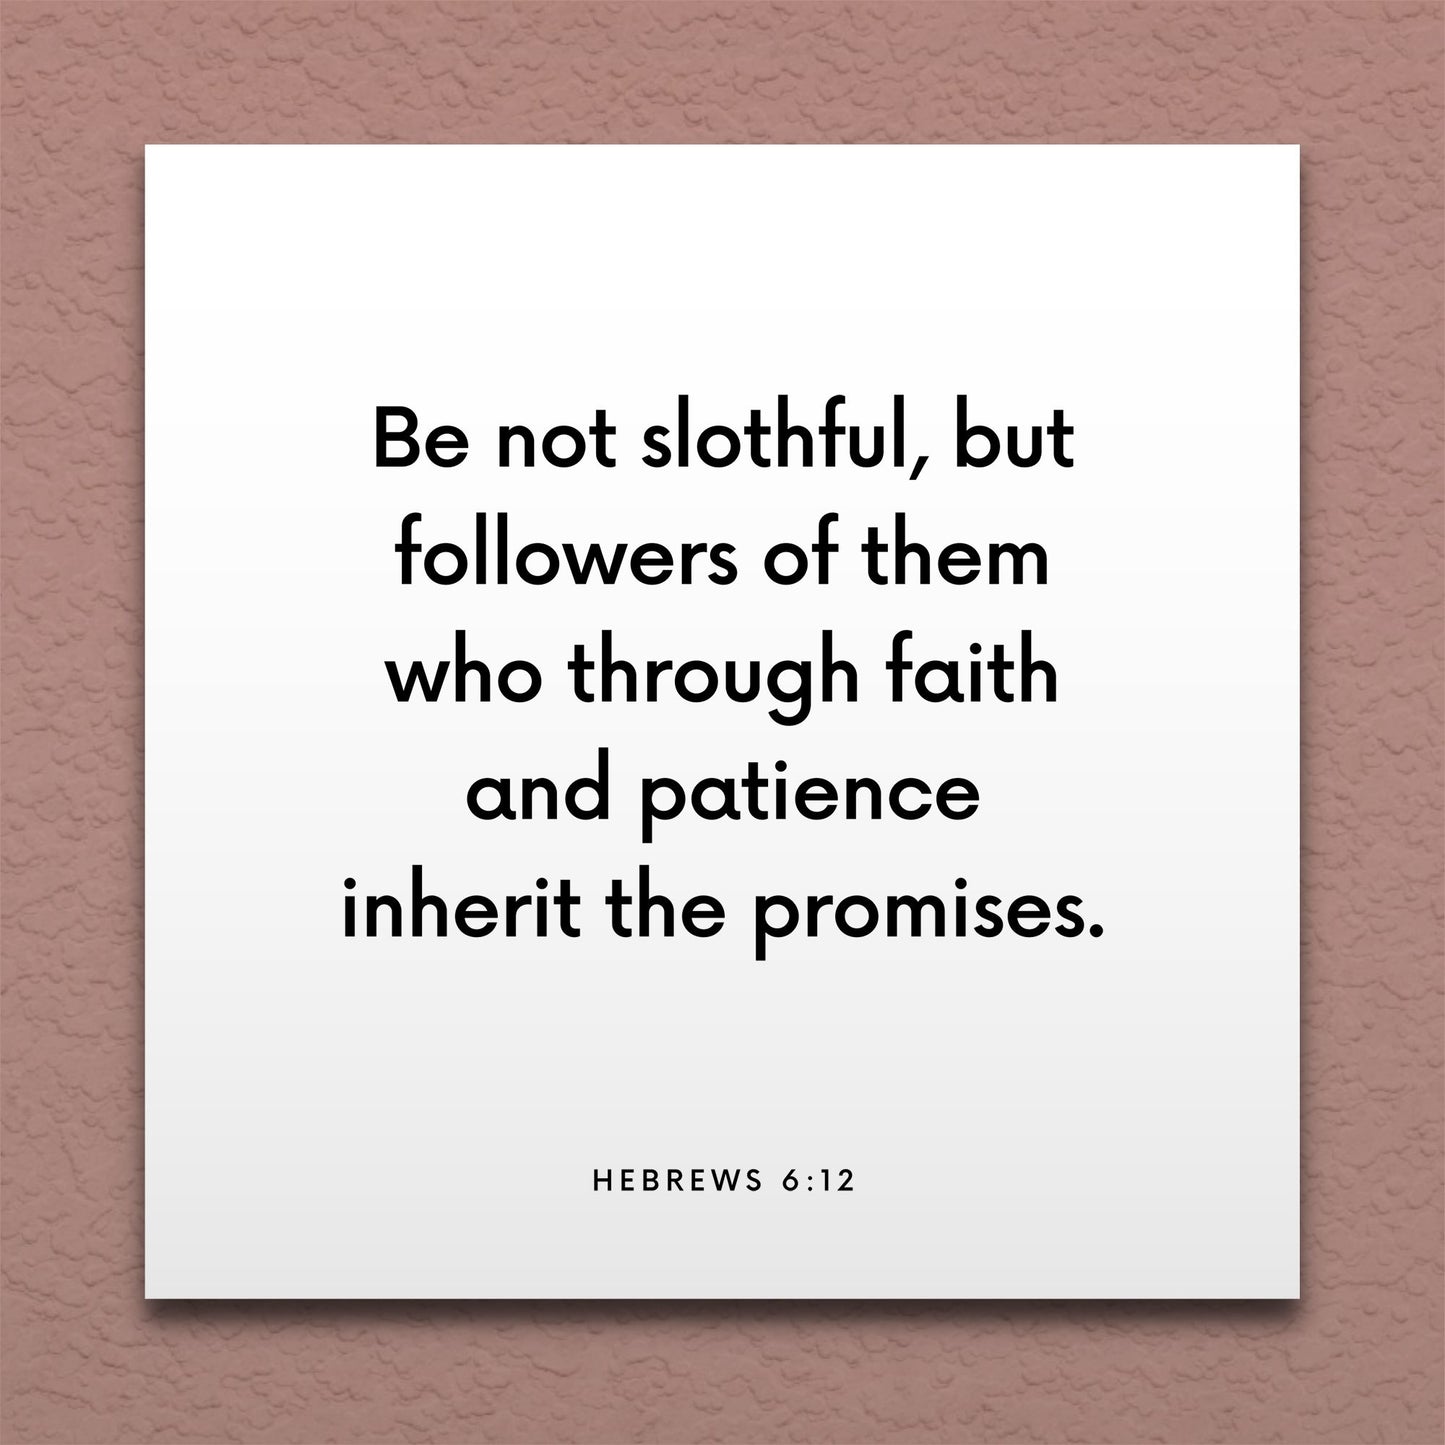 Wall-mounted scripture tile for Hebrews 6:12 - "Be not slothful, but followers of them who through faith"